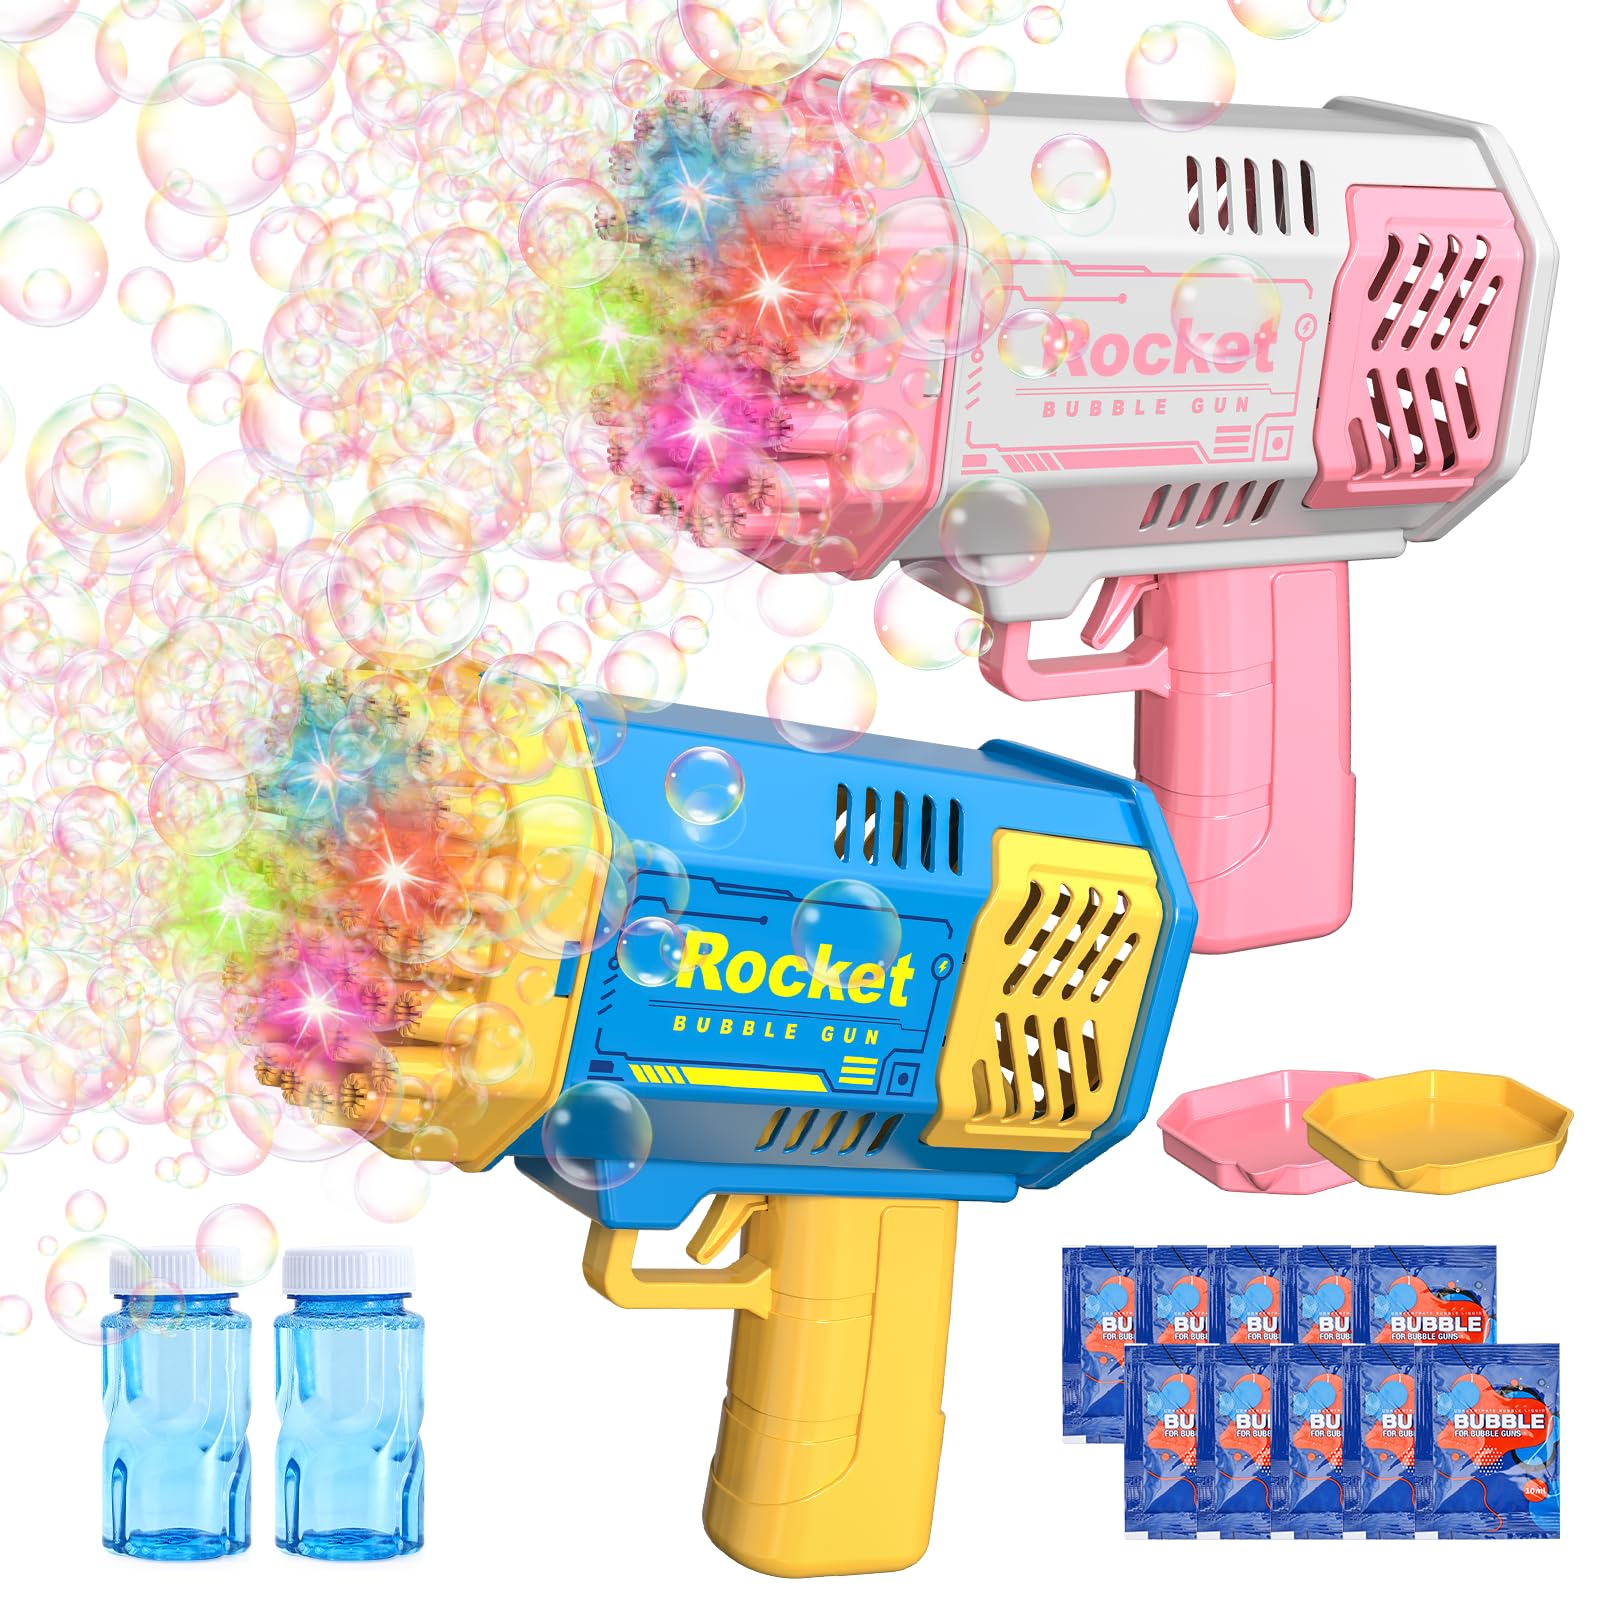 Bubble Machine 2 Pack Mini Bubble Gun for Toddlers, Bubble Maker Blower Toys with Lights,4000+ Bubbles Per Minute for Boys Girls Toddlers Outdoor Indoor Birthday Wedding Party (blue pink)